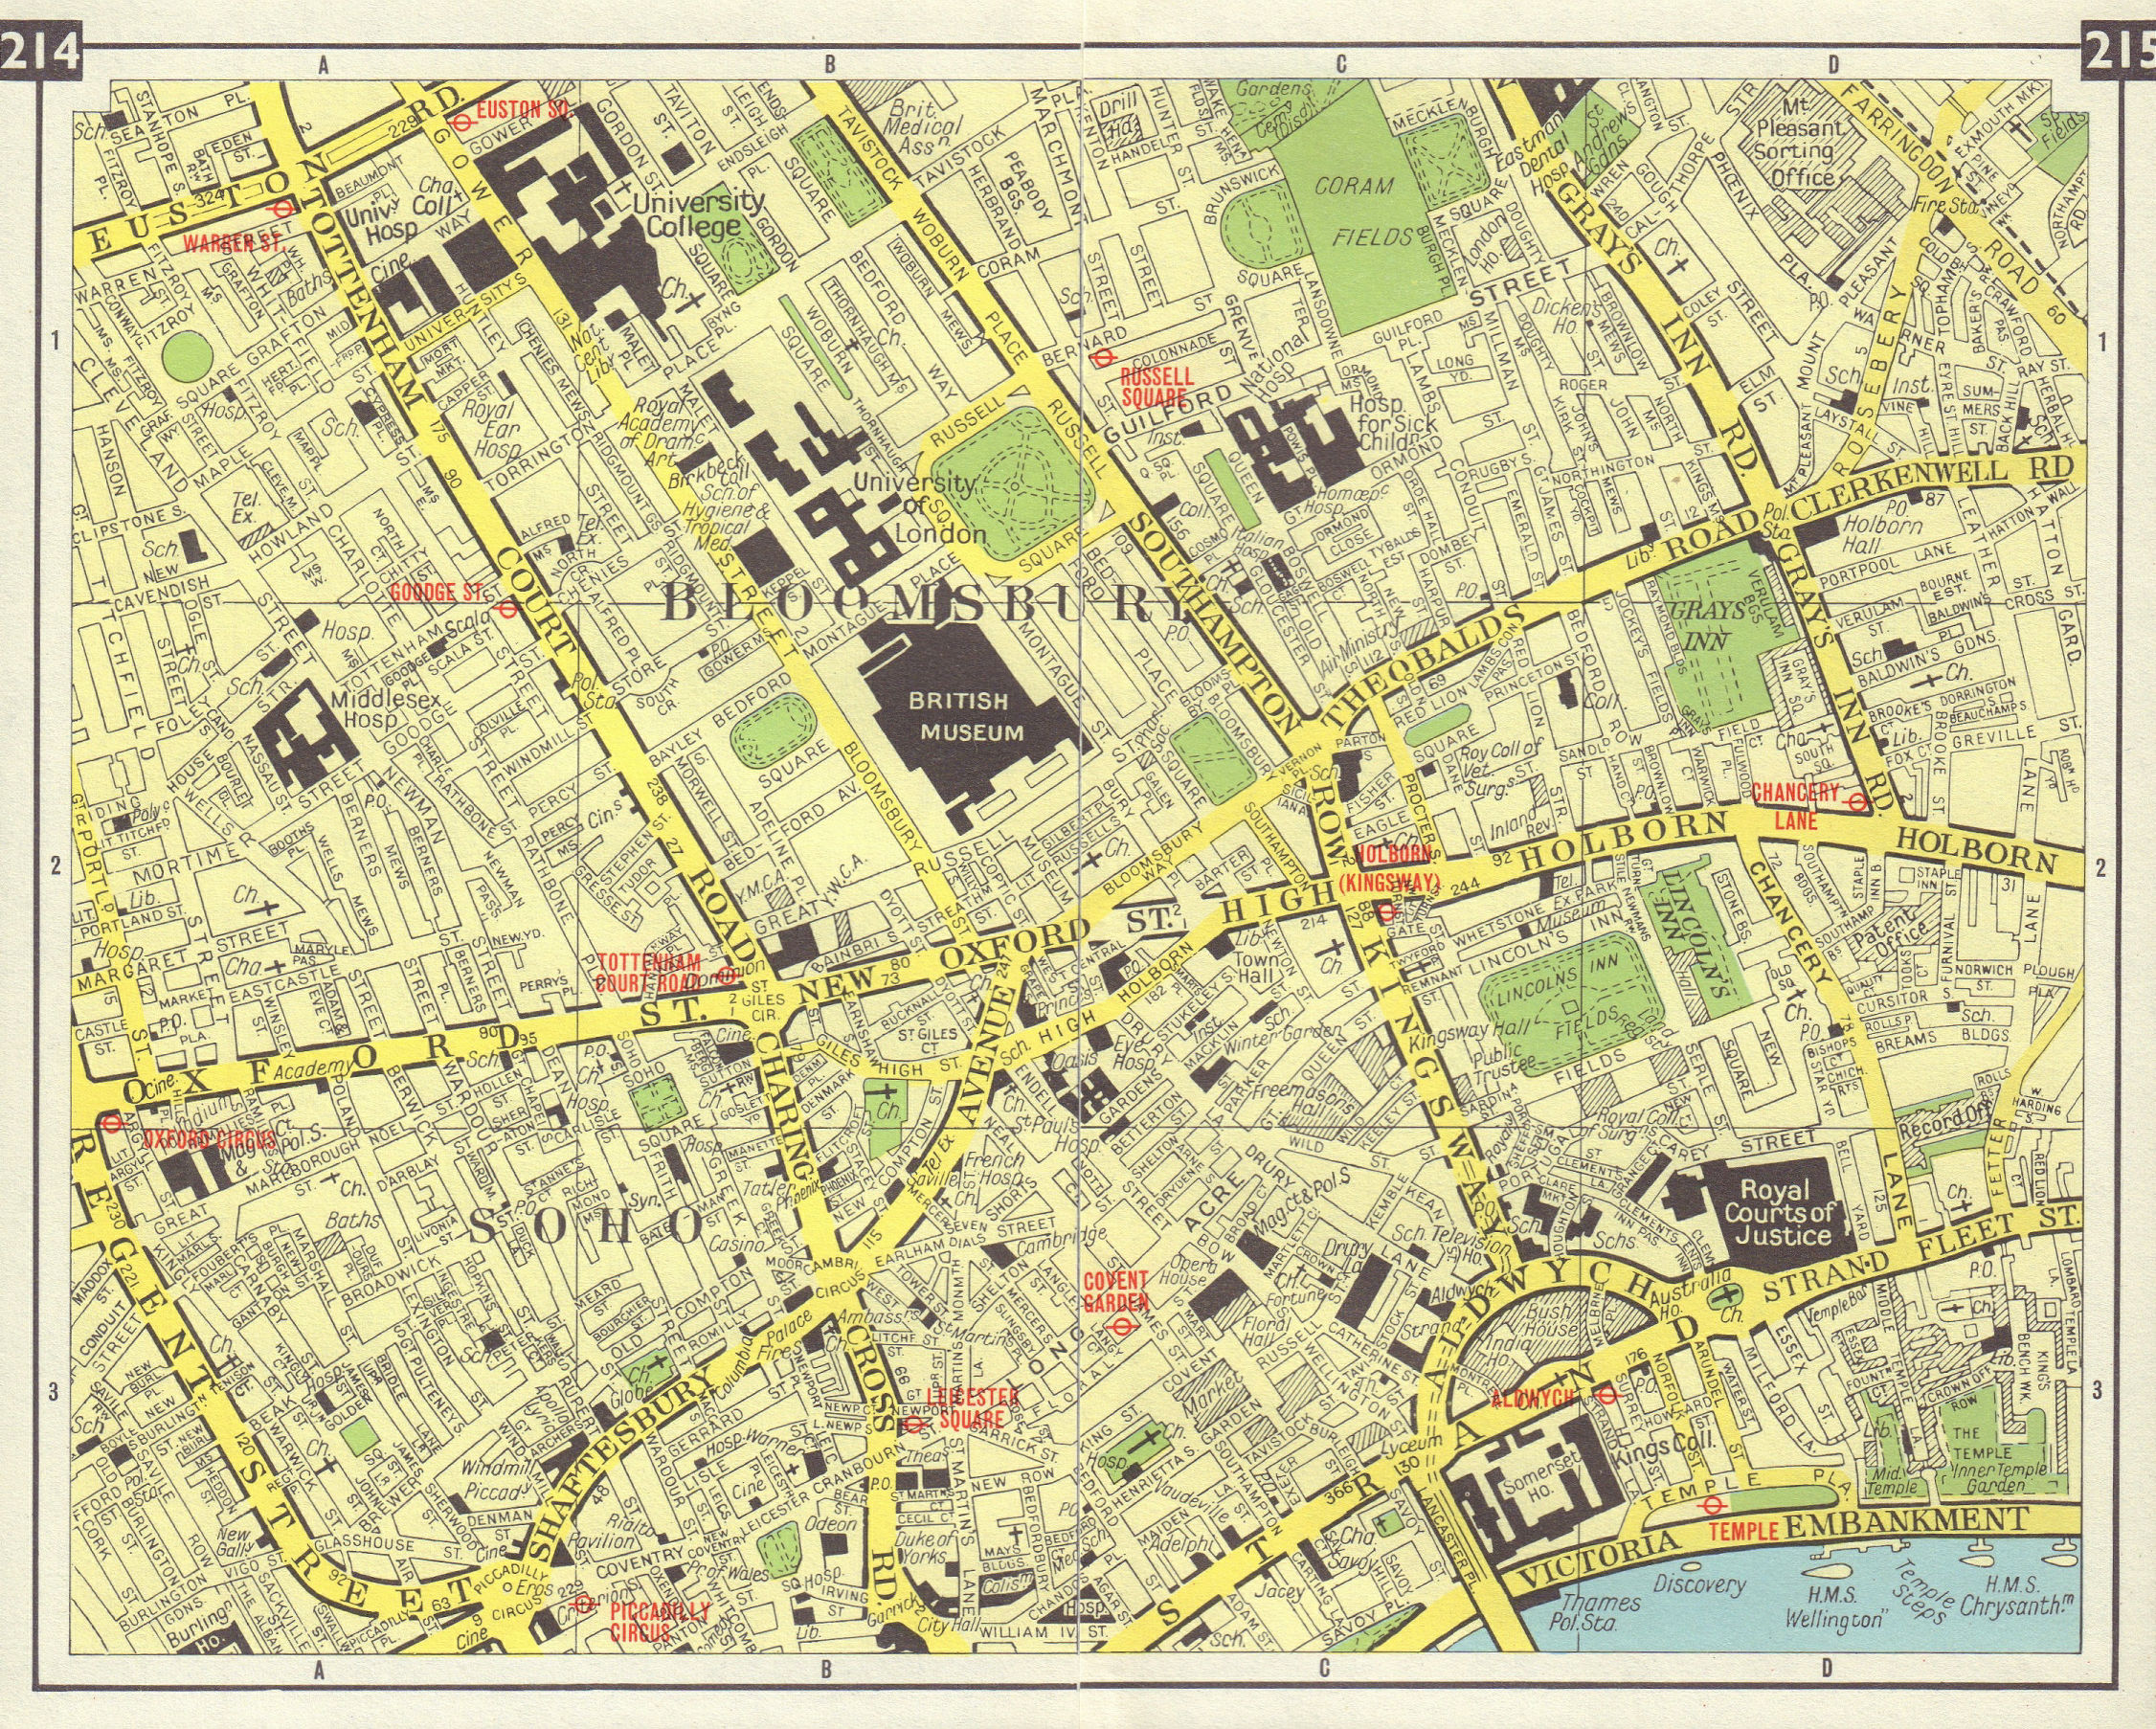 LONDON WEST END Soho Bloomsbury Covent Garden Fitzrovia Holborn Aldwych 1965 map